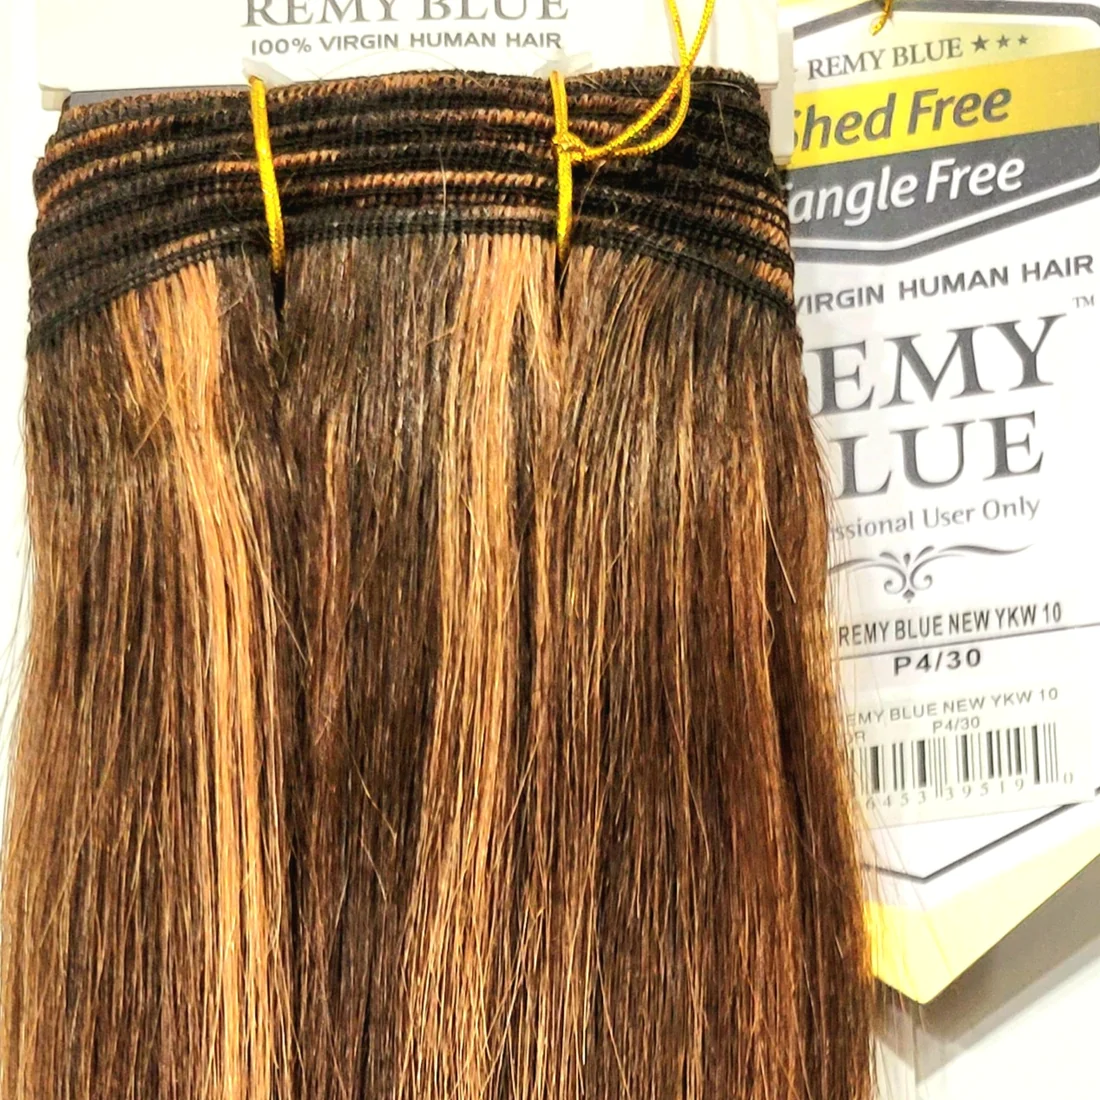 Remy Blue Human Hair New Yaky 14"